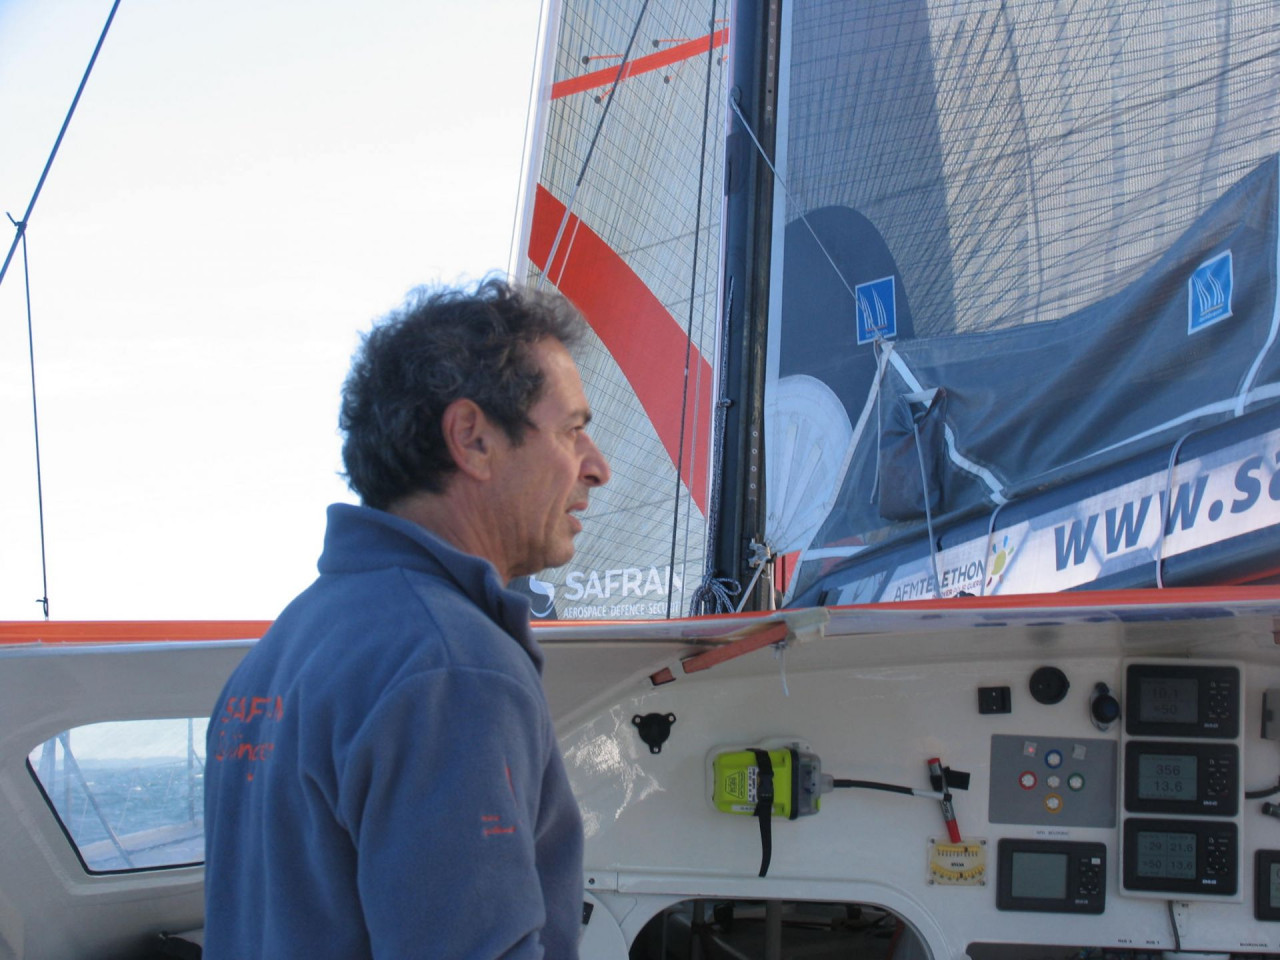 Some busy weeks ahead for the IMOCA 60s